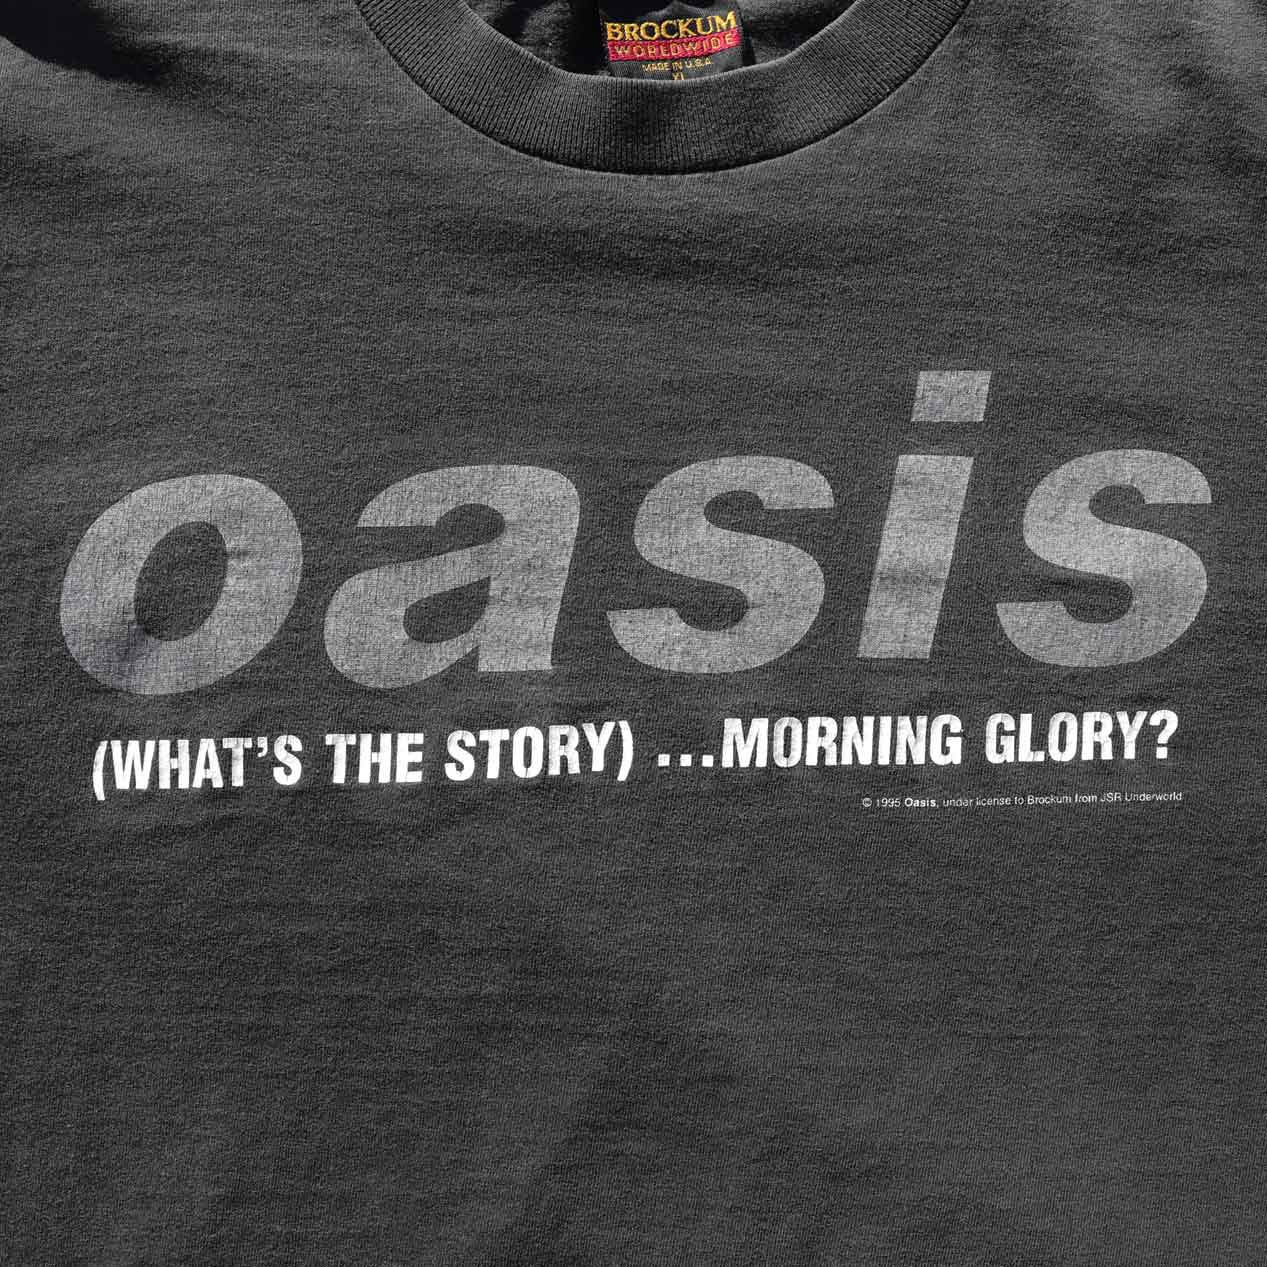 POST JUNK / 90's OASIS “(WHAT'S THE STORY) MORNING GLORY?” T-Shirt 